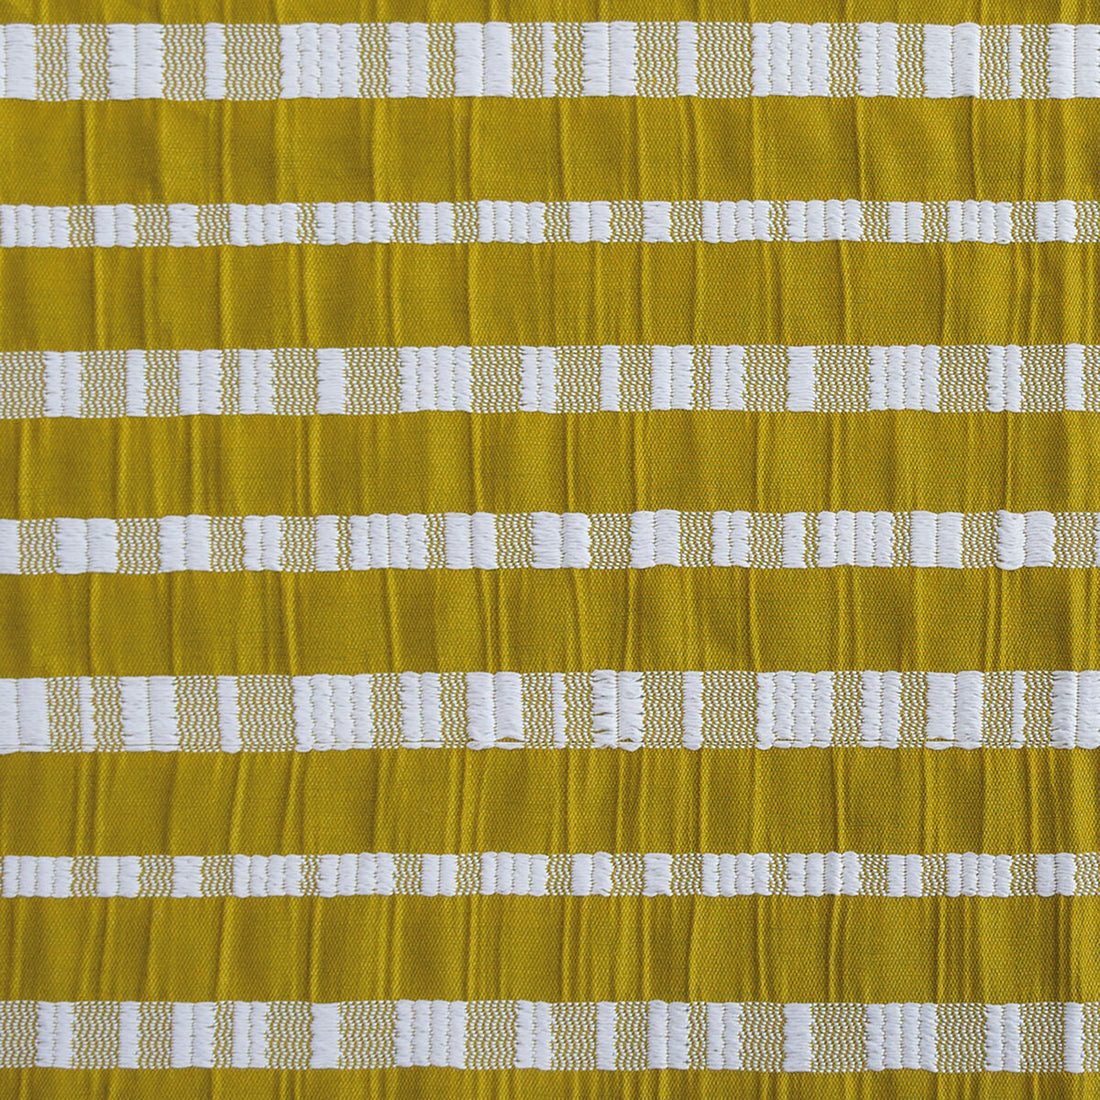 Chi fabric in amarillo color - pattern GDT5645.001.0 - by Gaston y Daniela in the Gaston Japon collection